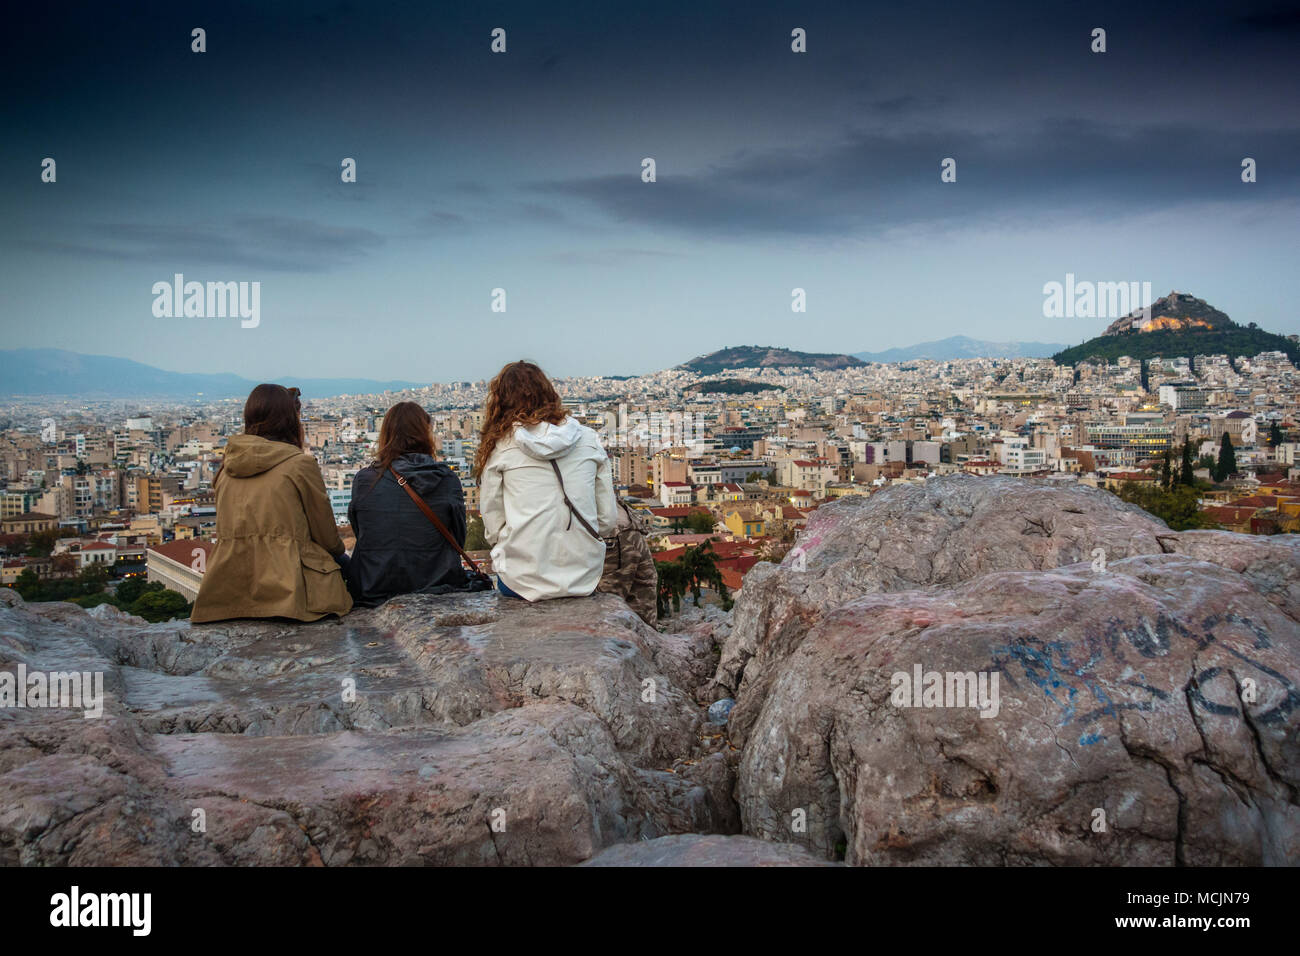 Three young women sitting on boulders and sightseeing Athens city, Greece Stock Photo